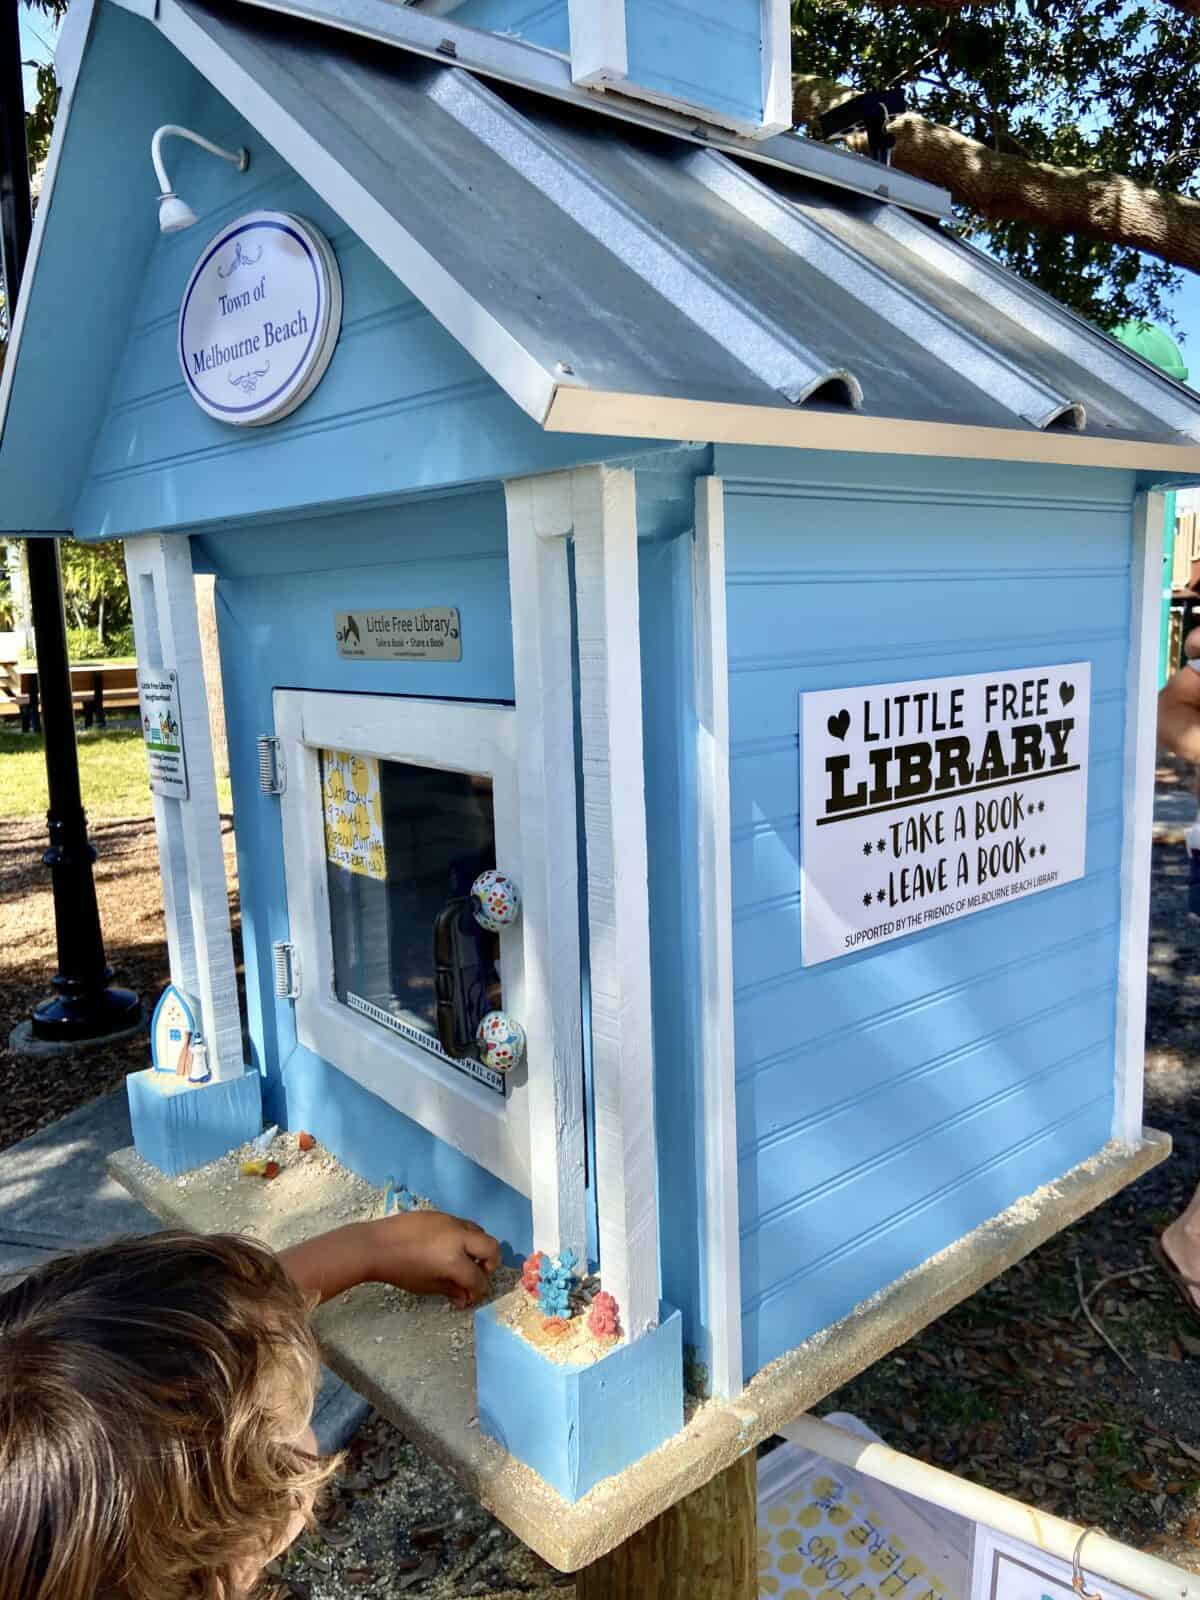 using little free libraries are great eco-friendly actions